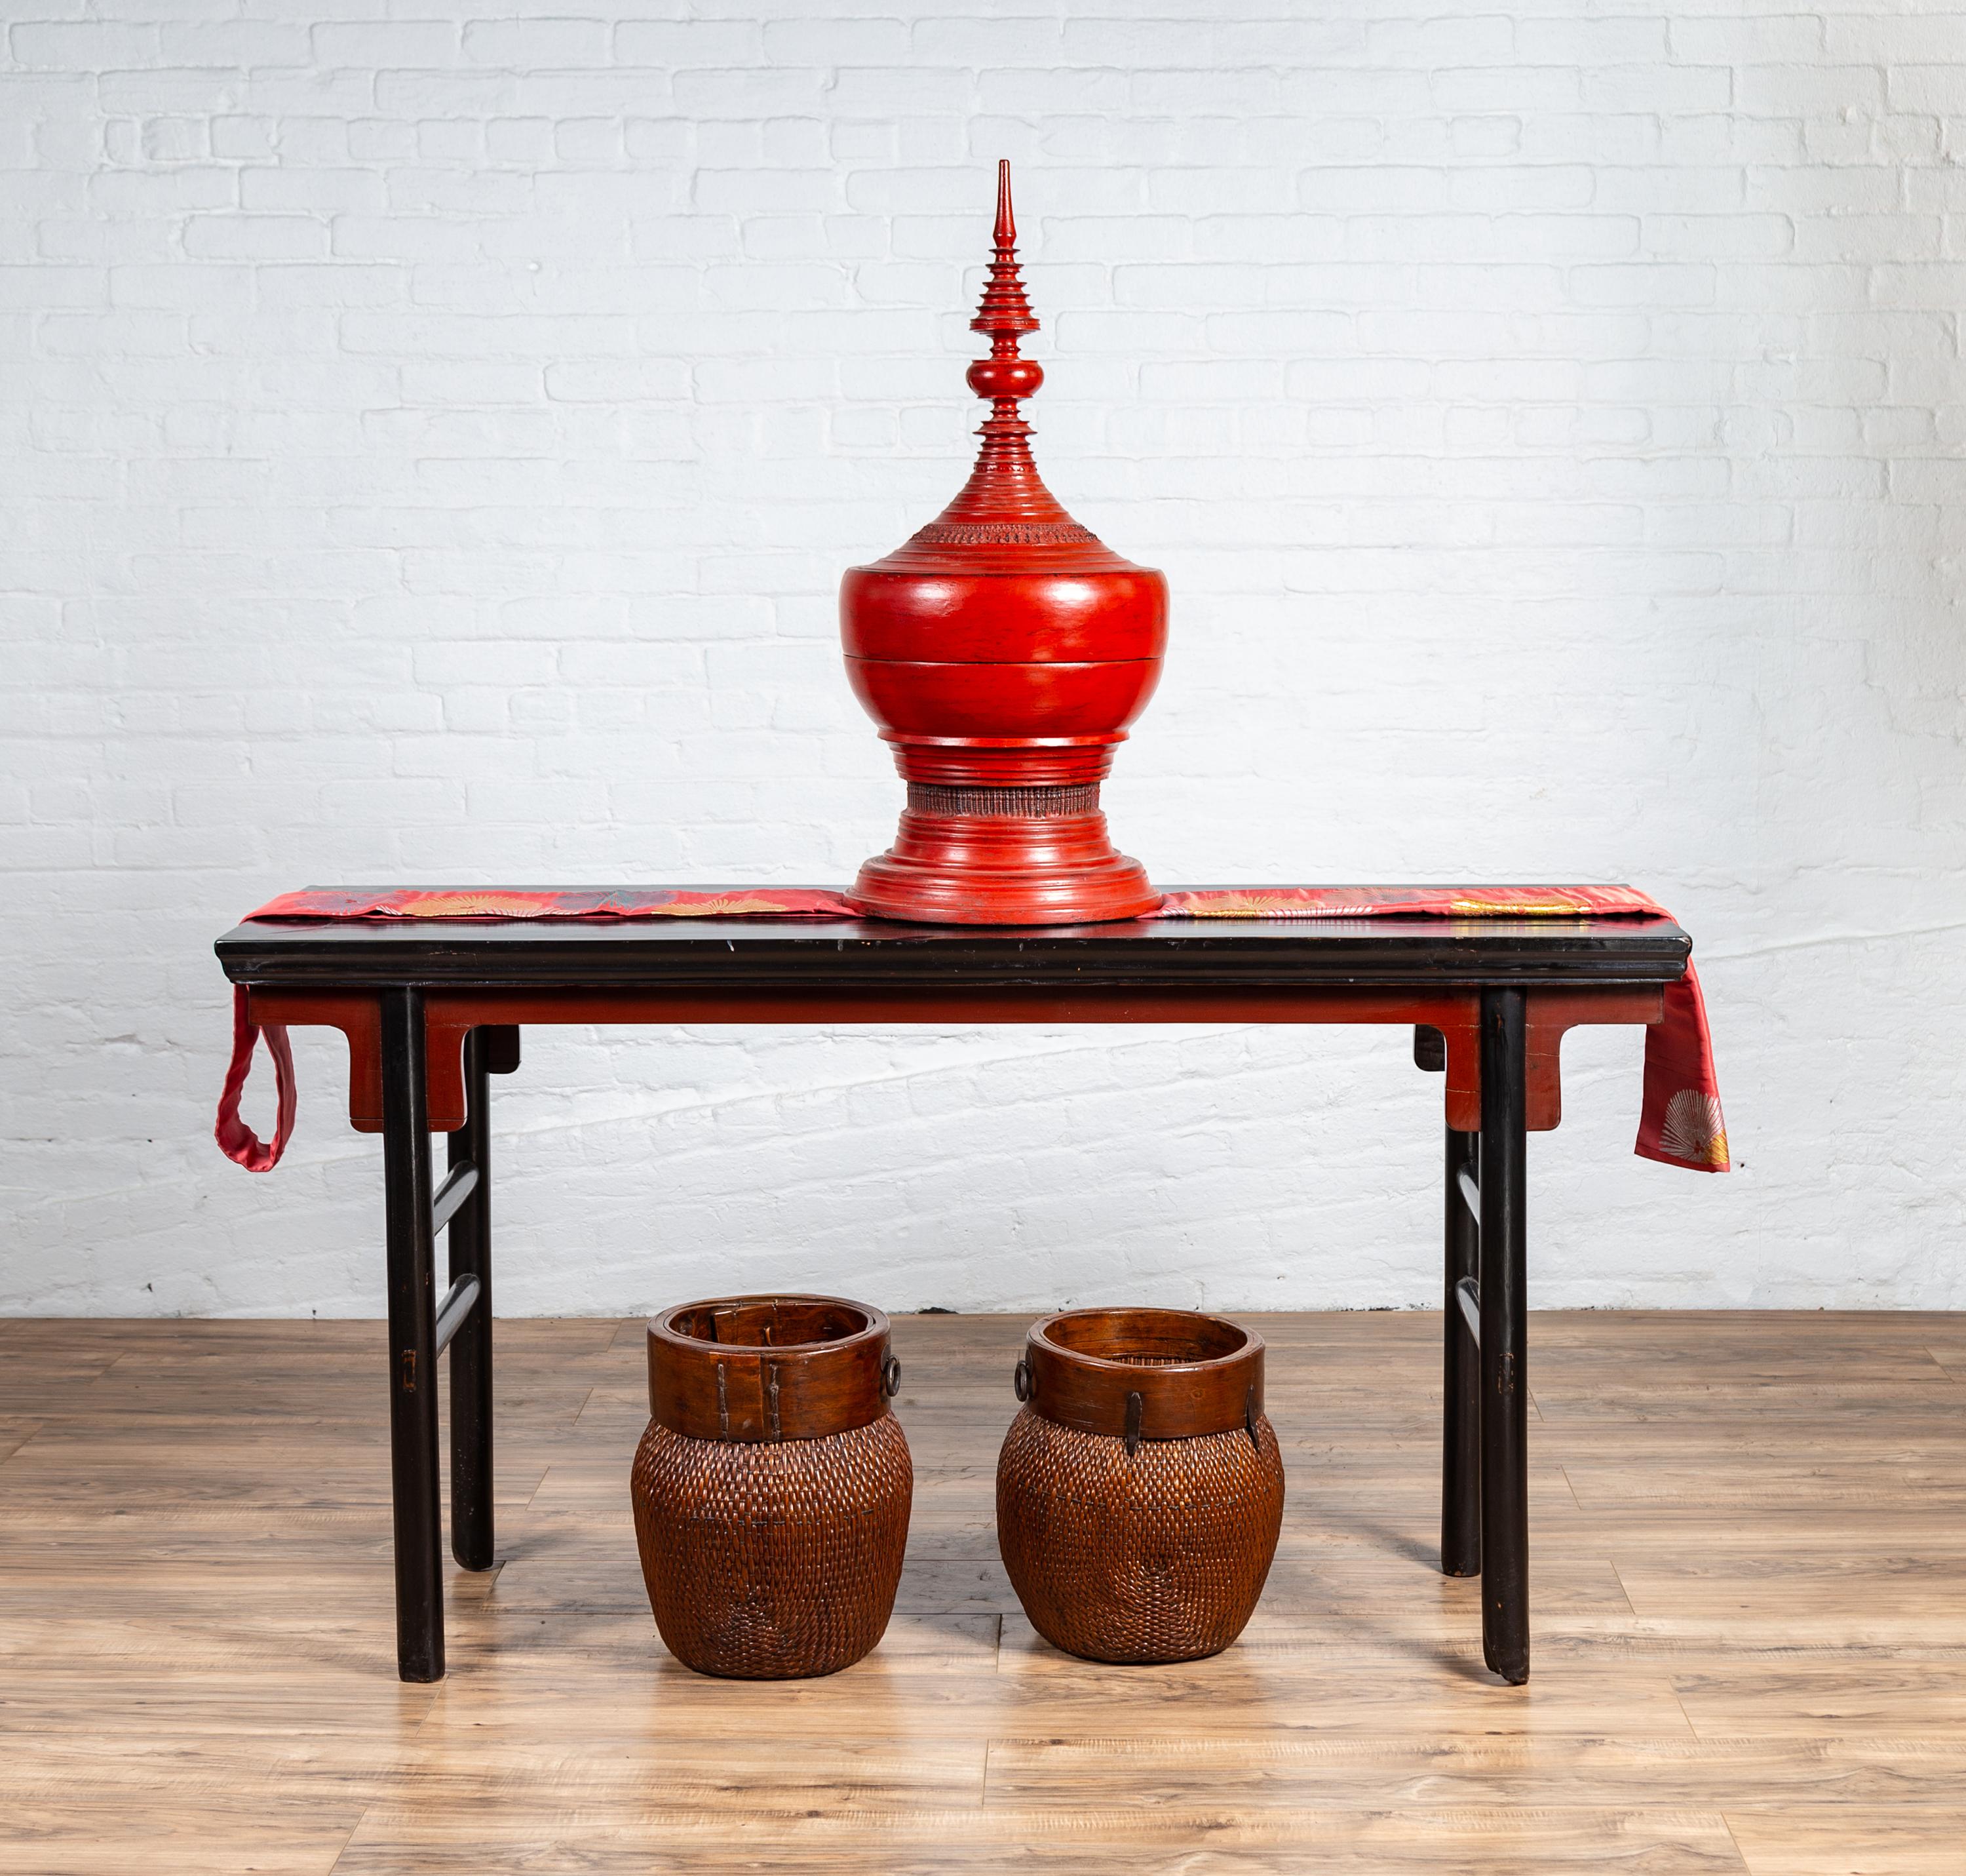 A Chinese Ming Dynasty style black lacquered altar console table from the early 20th century, with red accents. Charming us with is clean, simple lines and contrasting colors, this Chinese Ming style altar console table features a rectangular top